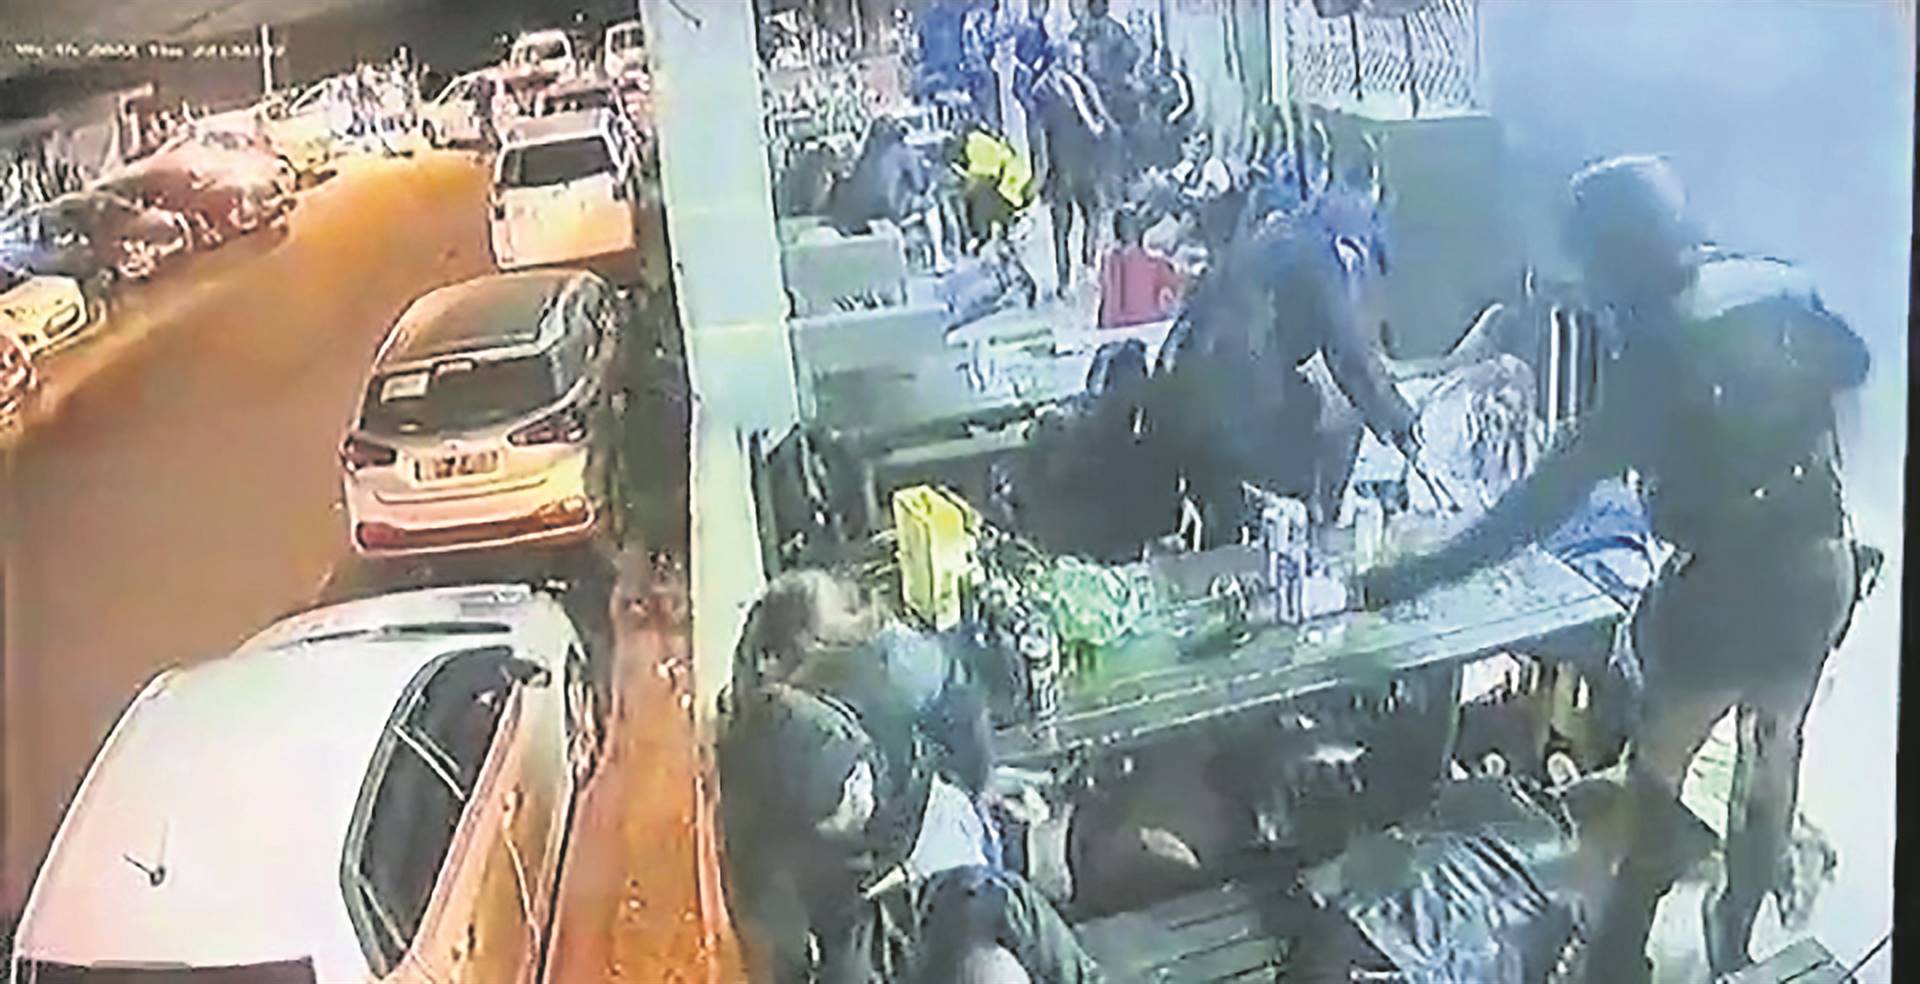 Screengrabs taken from a video in which cops are seen arriving at one of the shisa nyamas in Umlazi, shouting and kicking patrons.